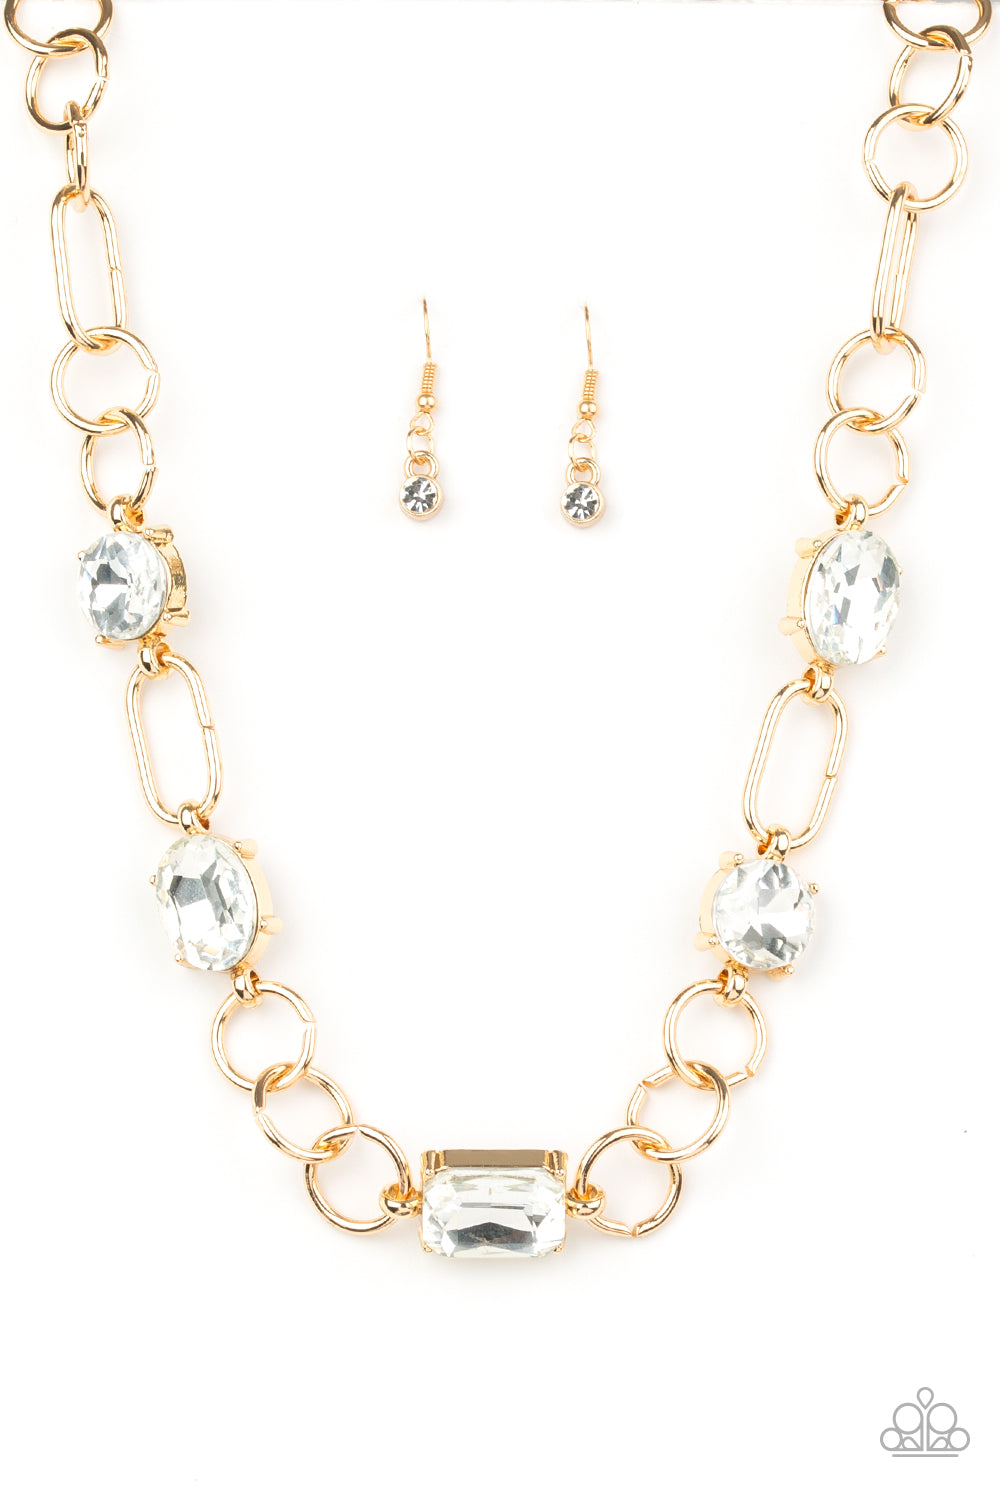 URBAN DISTRICT - GOLD LARGE CLEAR RHINESTONES BOLD NECKLACE